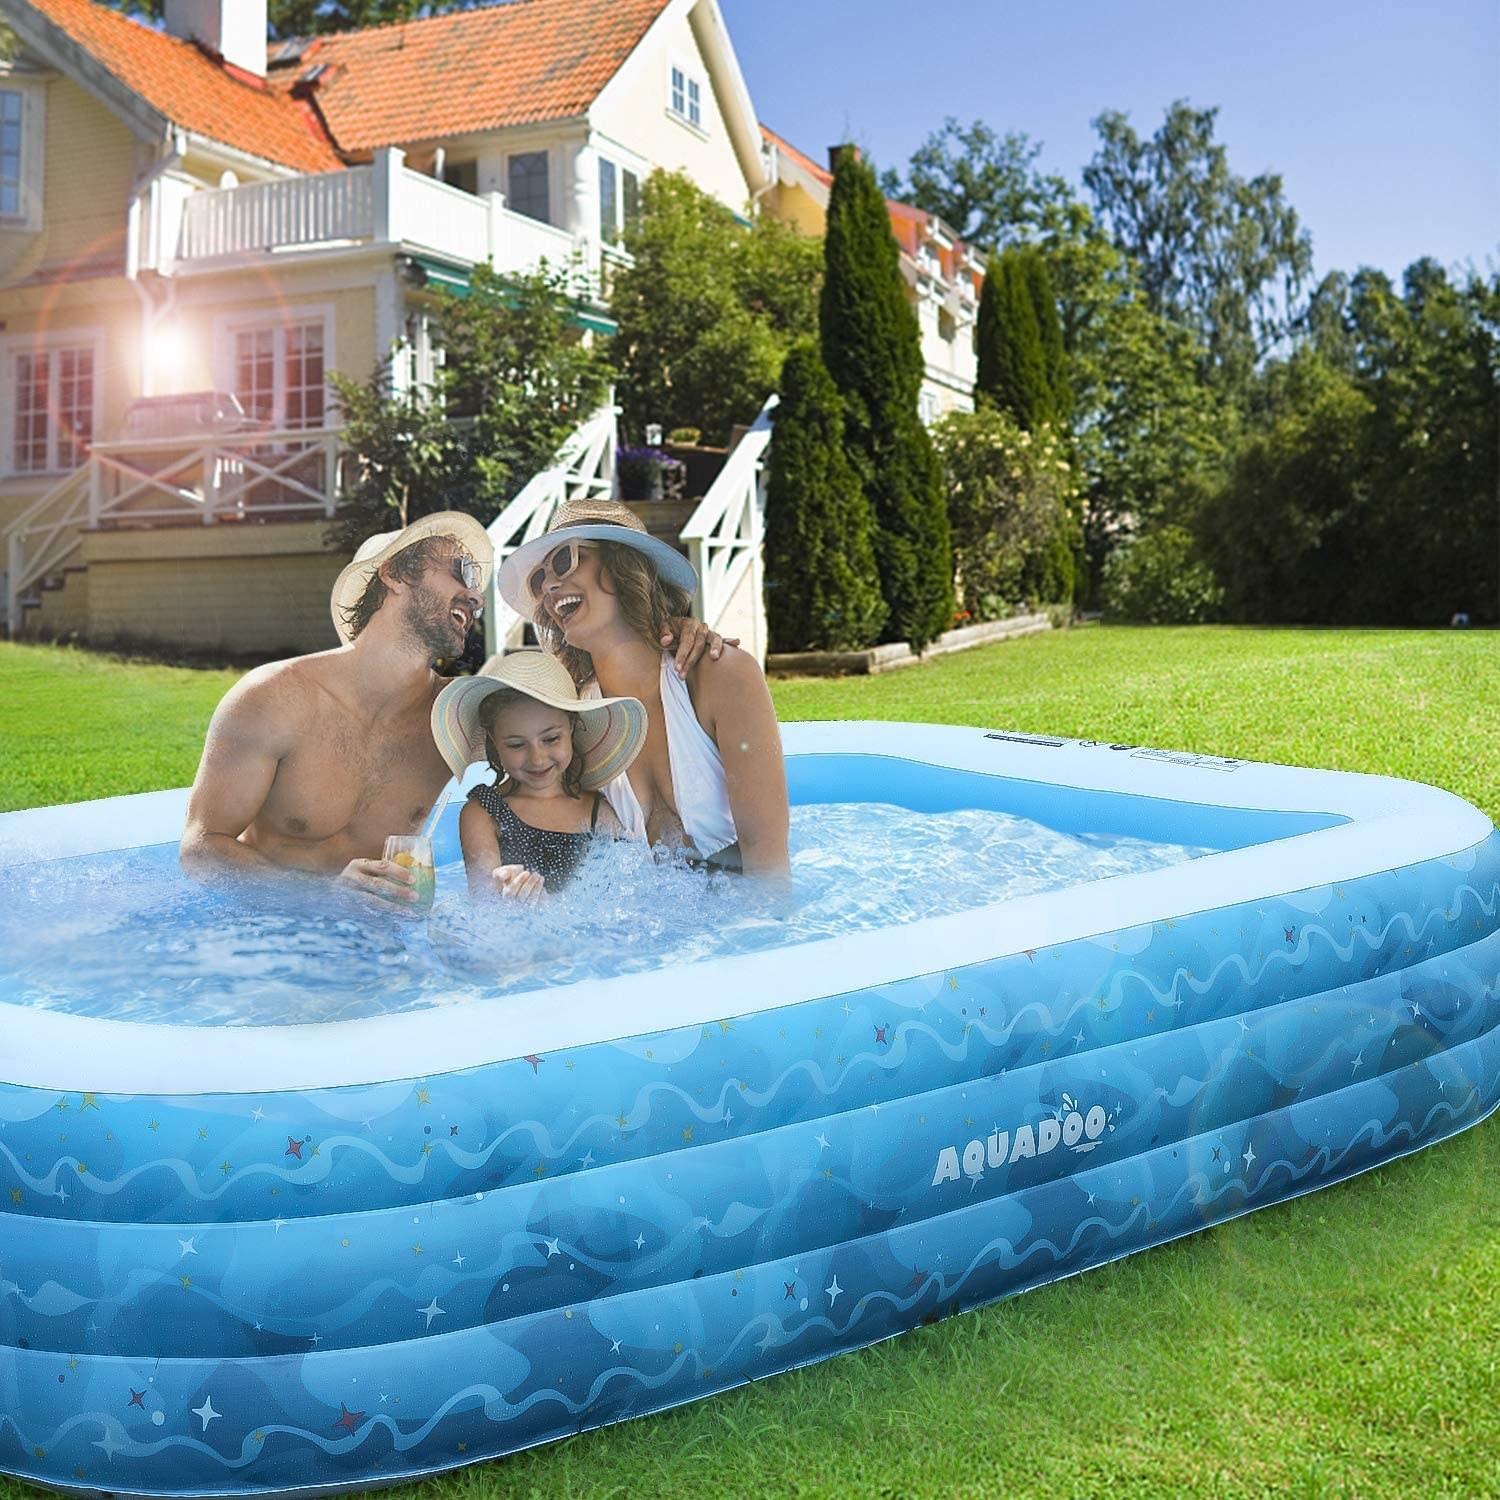 The rectangular, three-ring pool with a wave design on the side and a couple and their kid inside